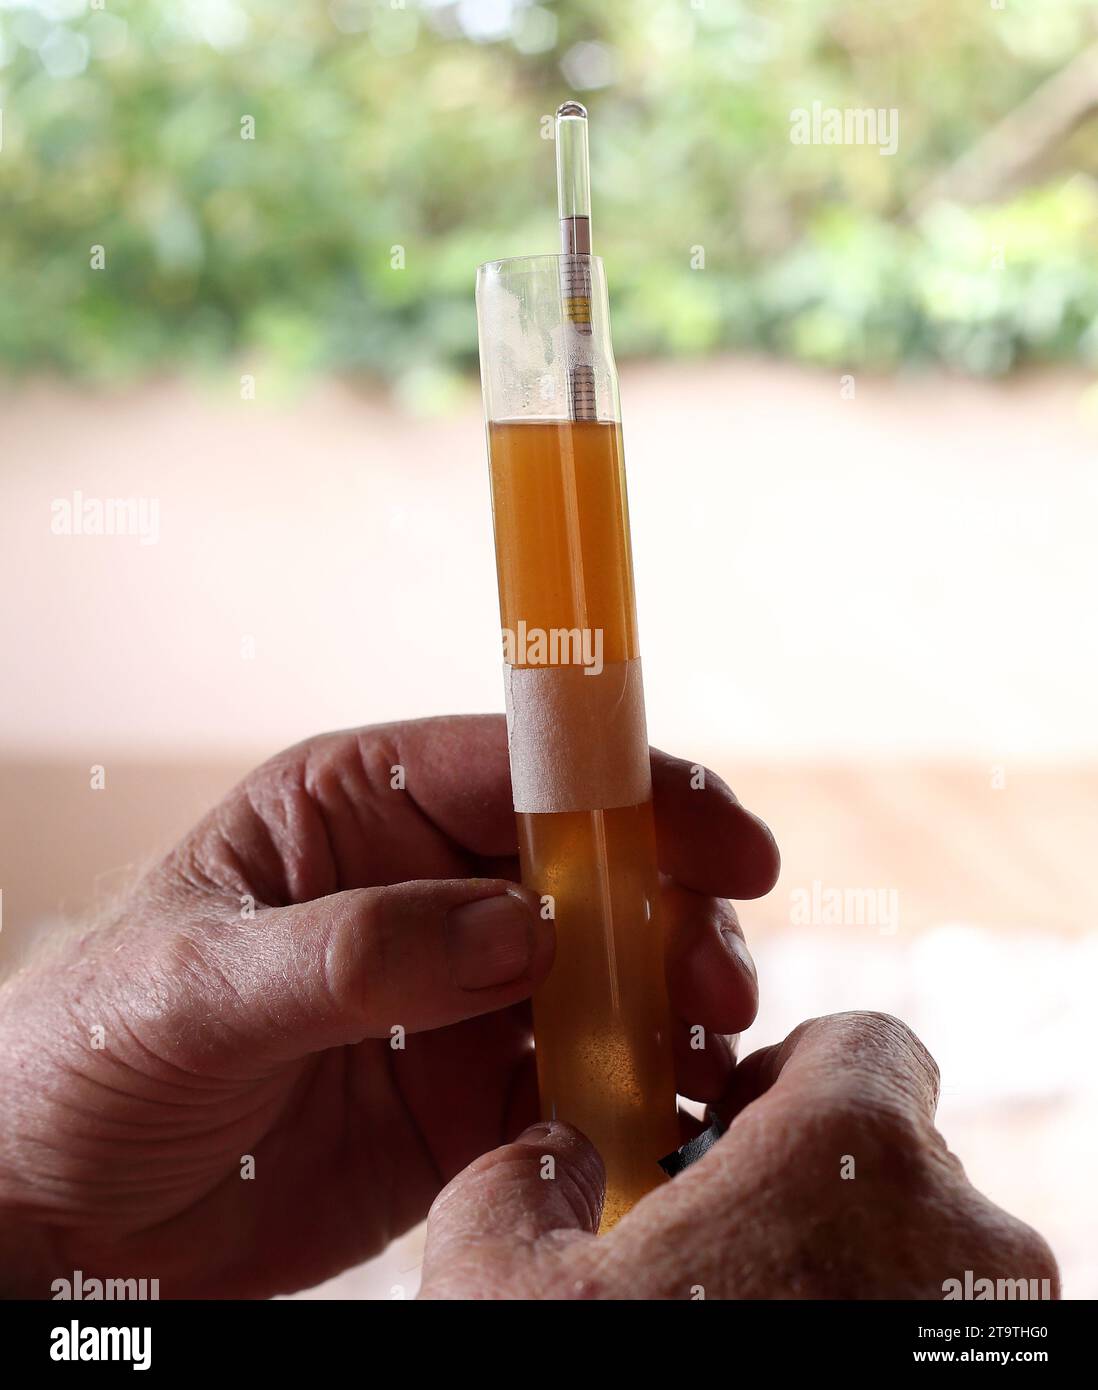 Measuring the alcohol content with a Hydrometer in a glass tube of beer. Stock Photo